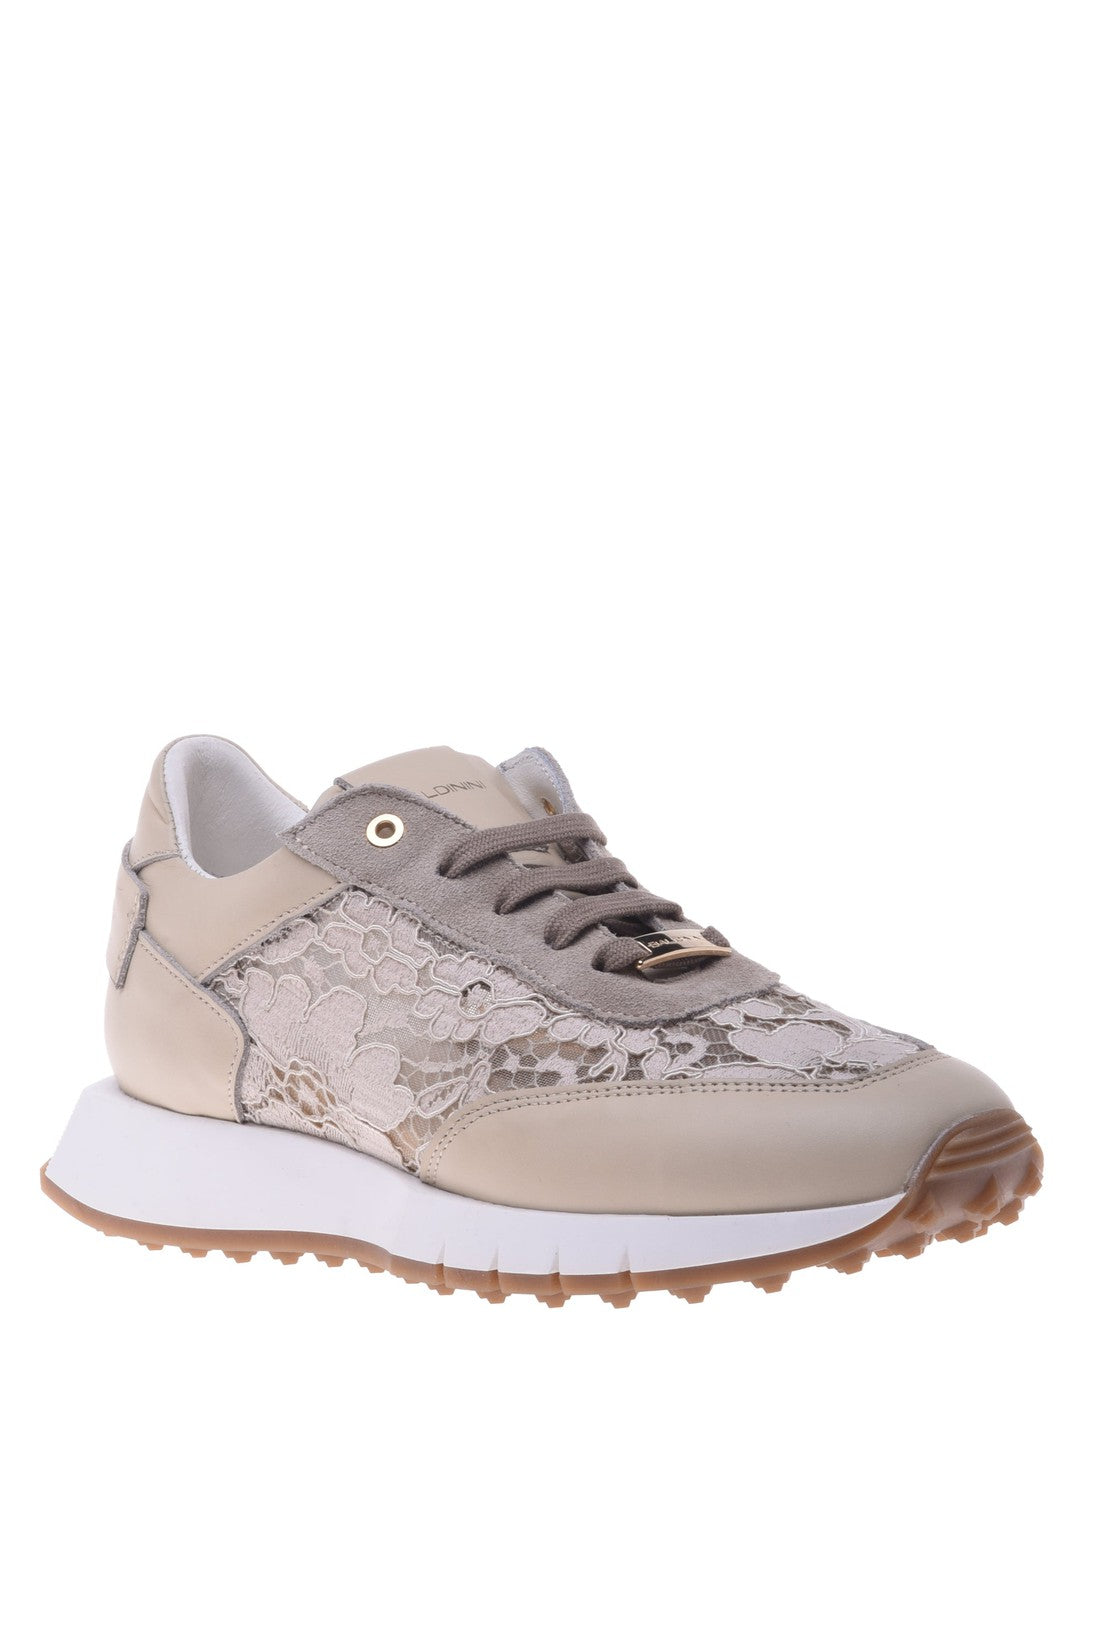 BALDININI-OUTLET-SALE-Sneaker-in-nude-nappa-leather-and-lace-Sneaker-35-ARCHIVE-COLLECTION.jpg